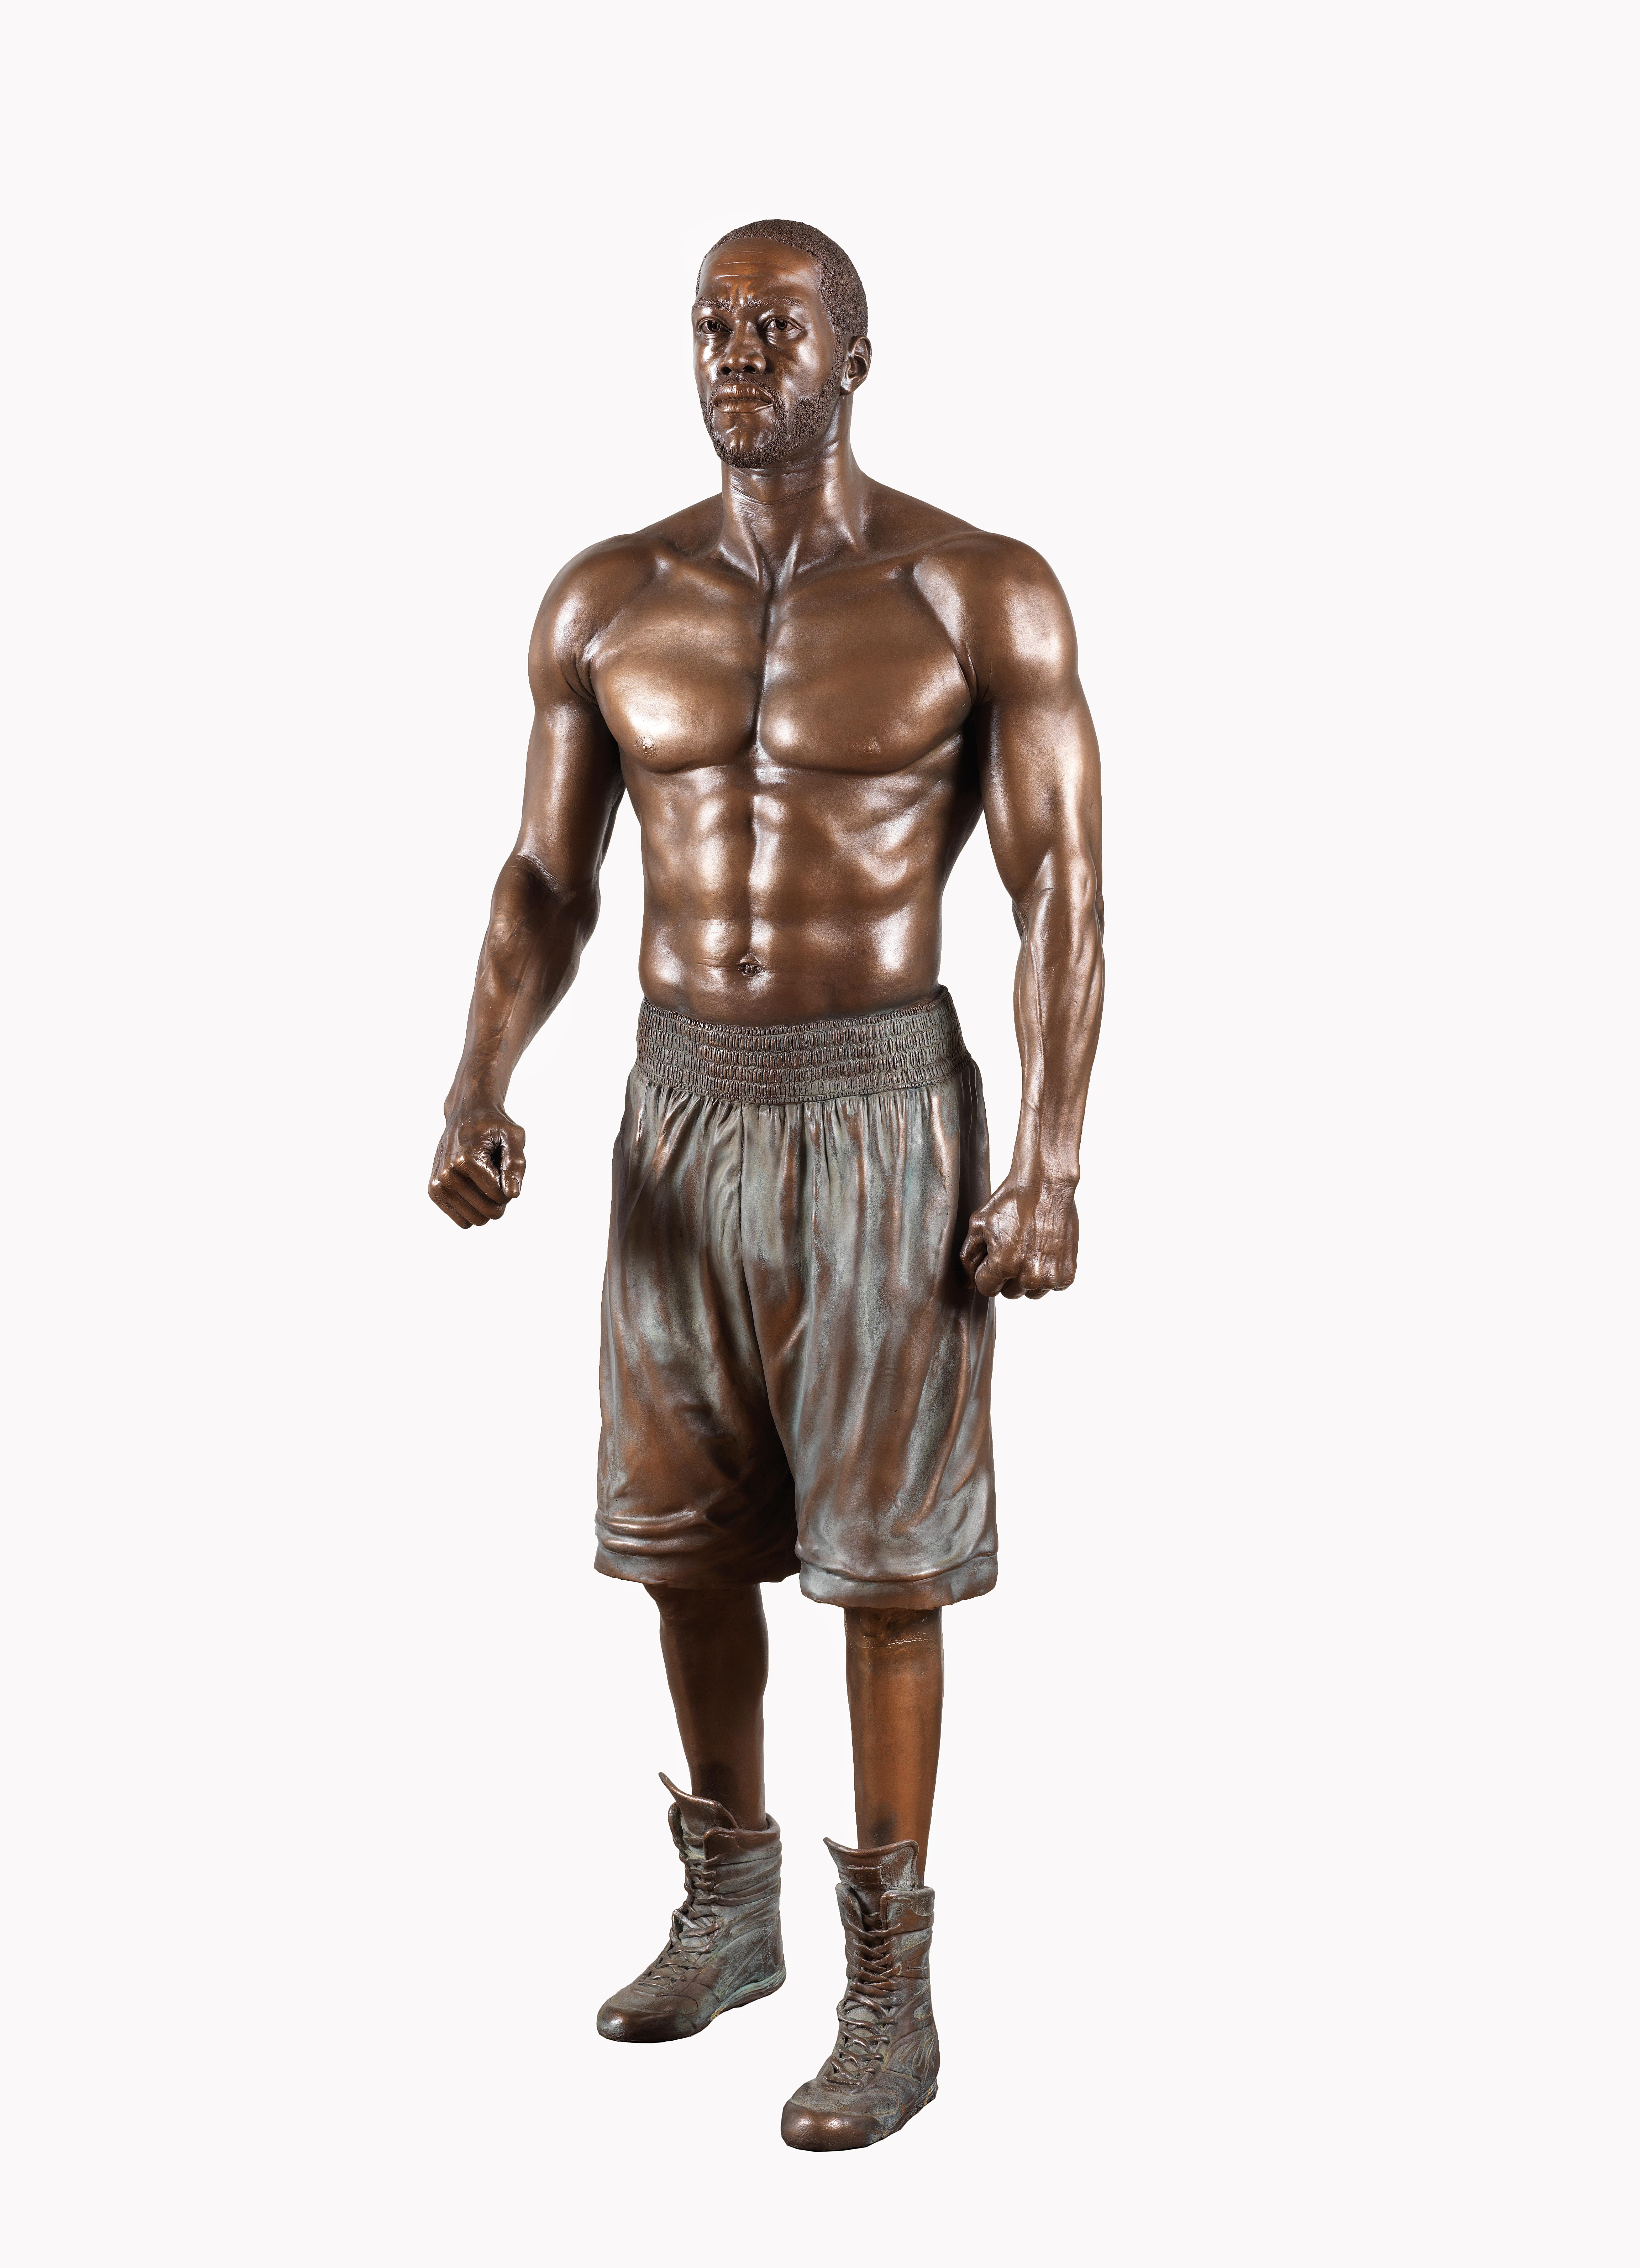 Caleb O'Connor Figurative Sculpture - Deontay Wilder, The Vow, Heavyweight Champion, Life Size Bronzed Resin Sculpture